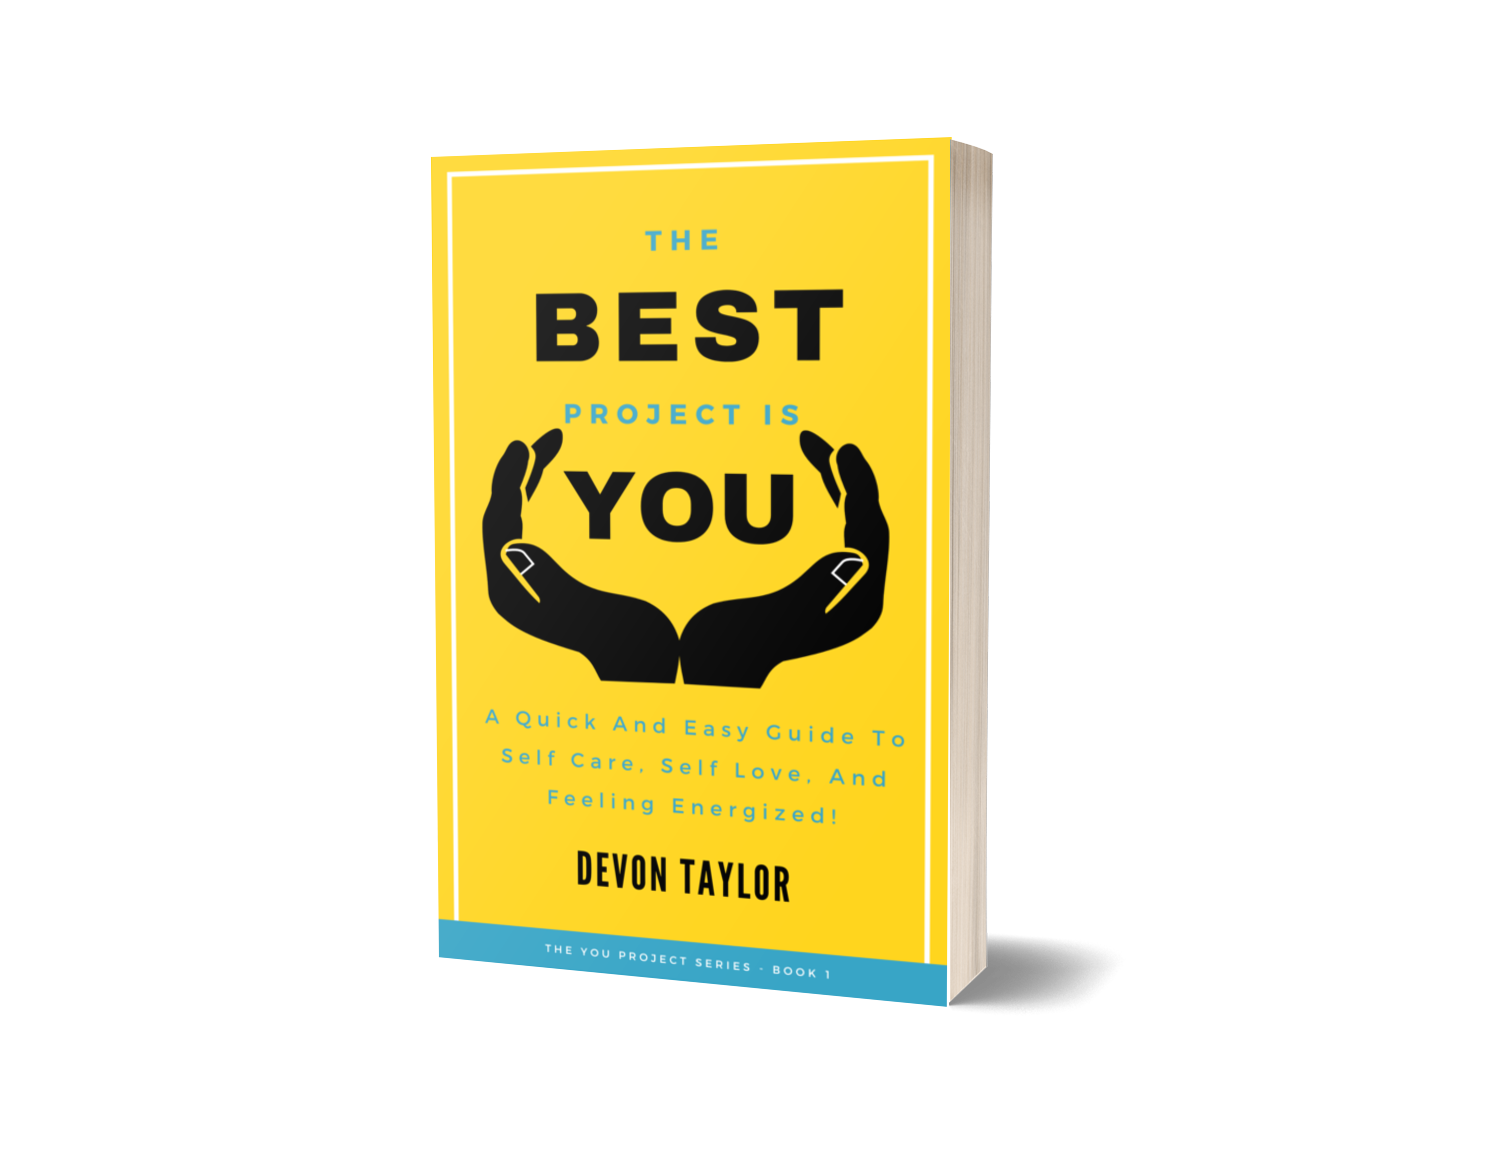 FREE: The Best Project Is You: The Quick and Easy Guide to Self Care, Self Love, and Feeling Energized. by Devon Taylor